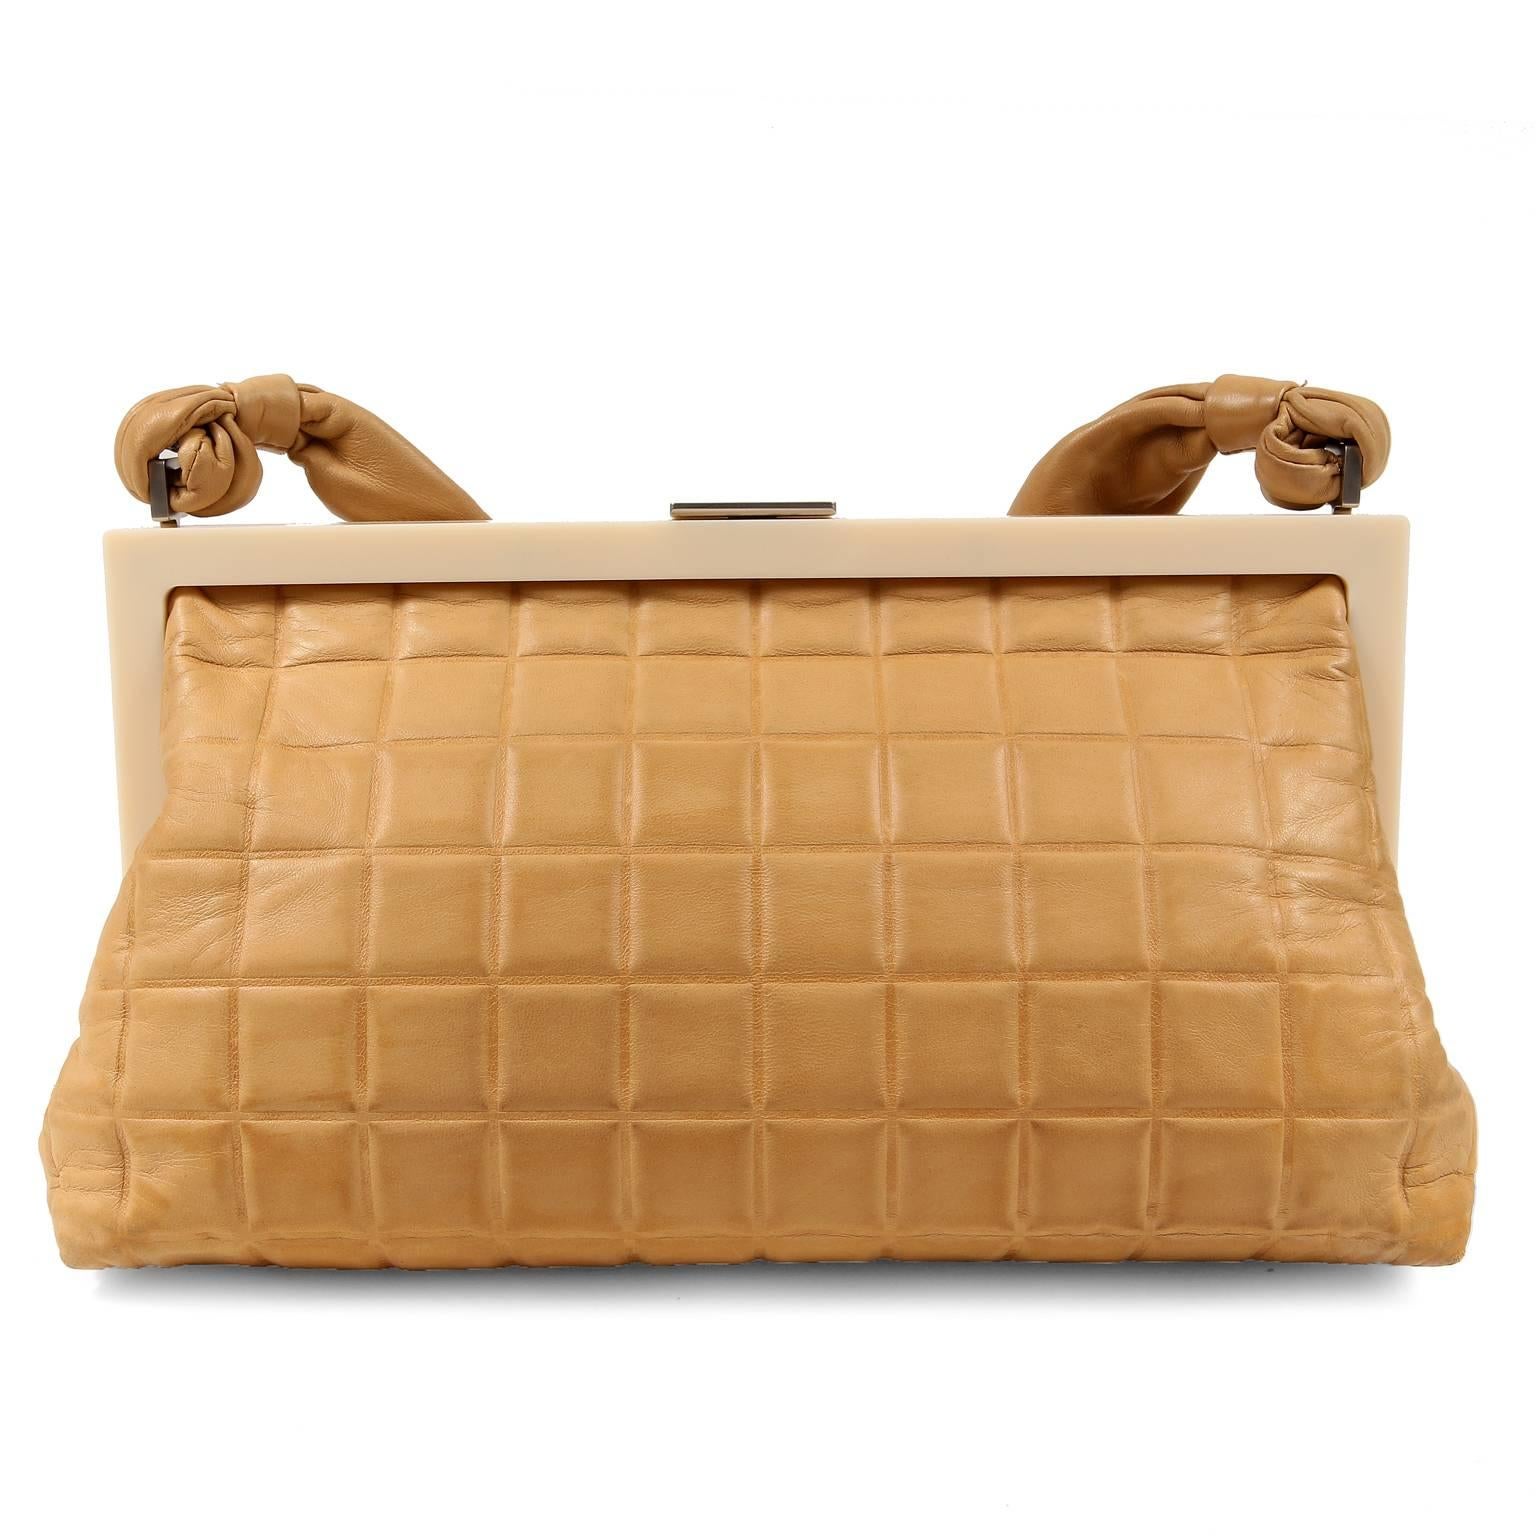 Chanel Beige Chocolate Bar Framed Bag- EXCELLENT PLUS 
 Perfect for dinner or traveling light, this neutral piece is certain to become a favorite. 

Beige leather is square quilted with an ivory resin framed top. Brushed silver CC clasp and beige